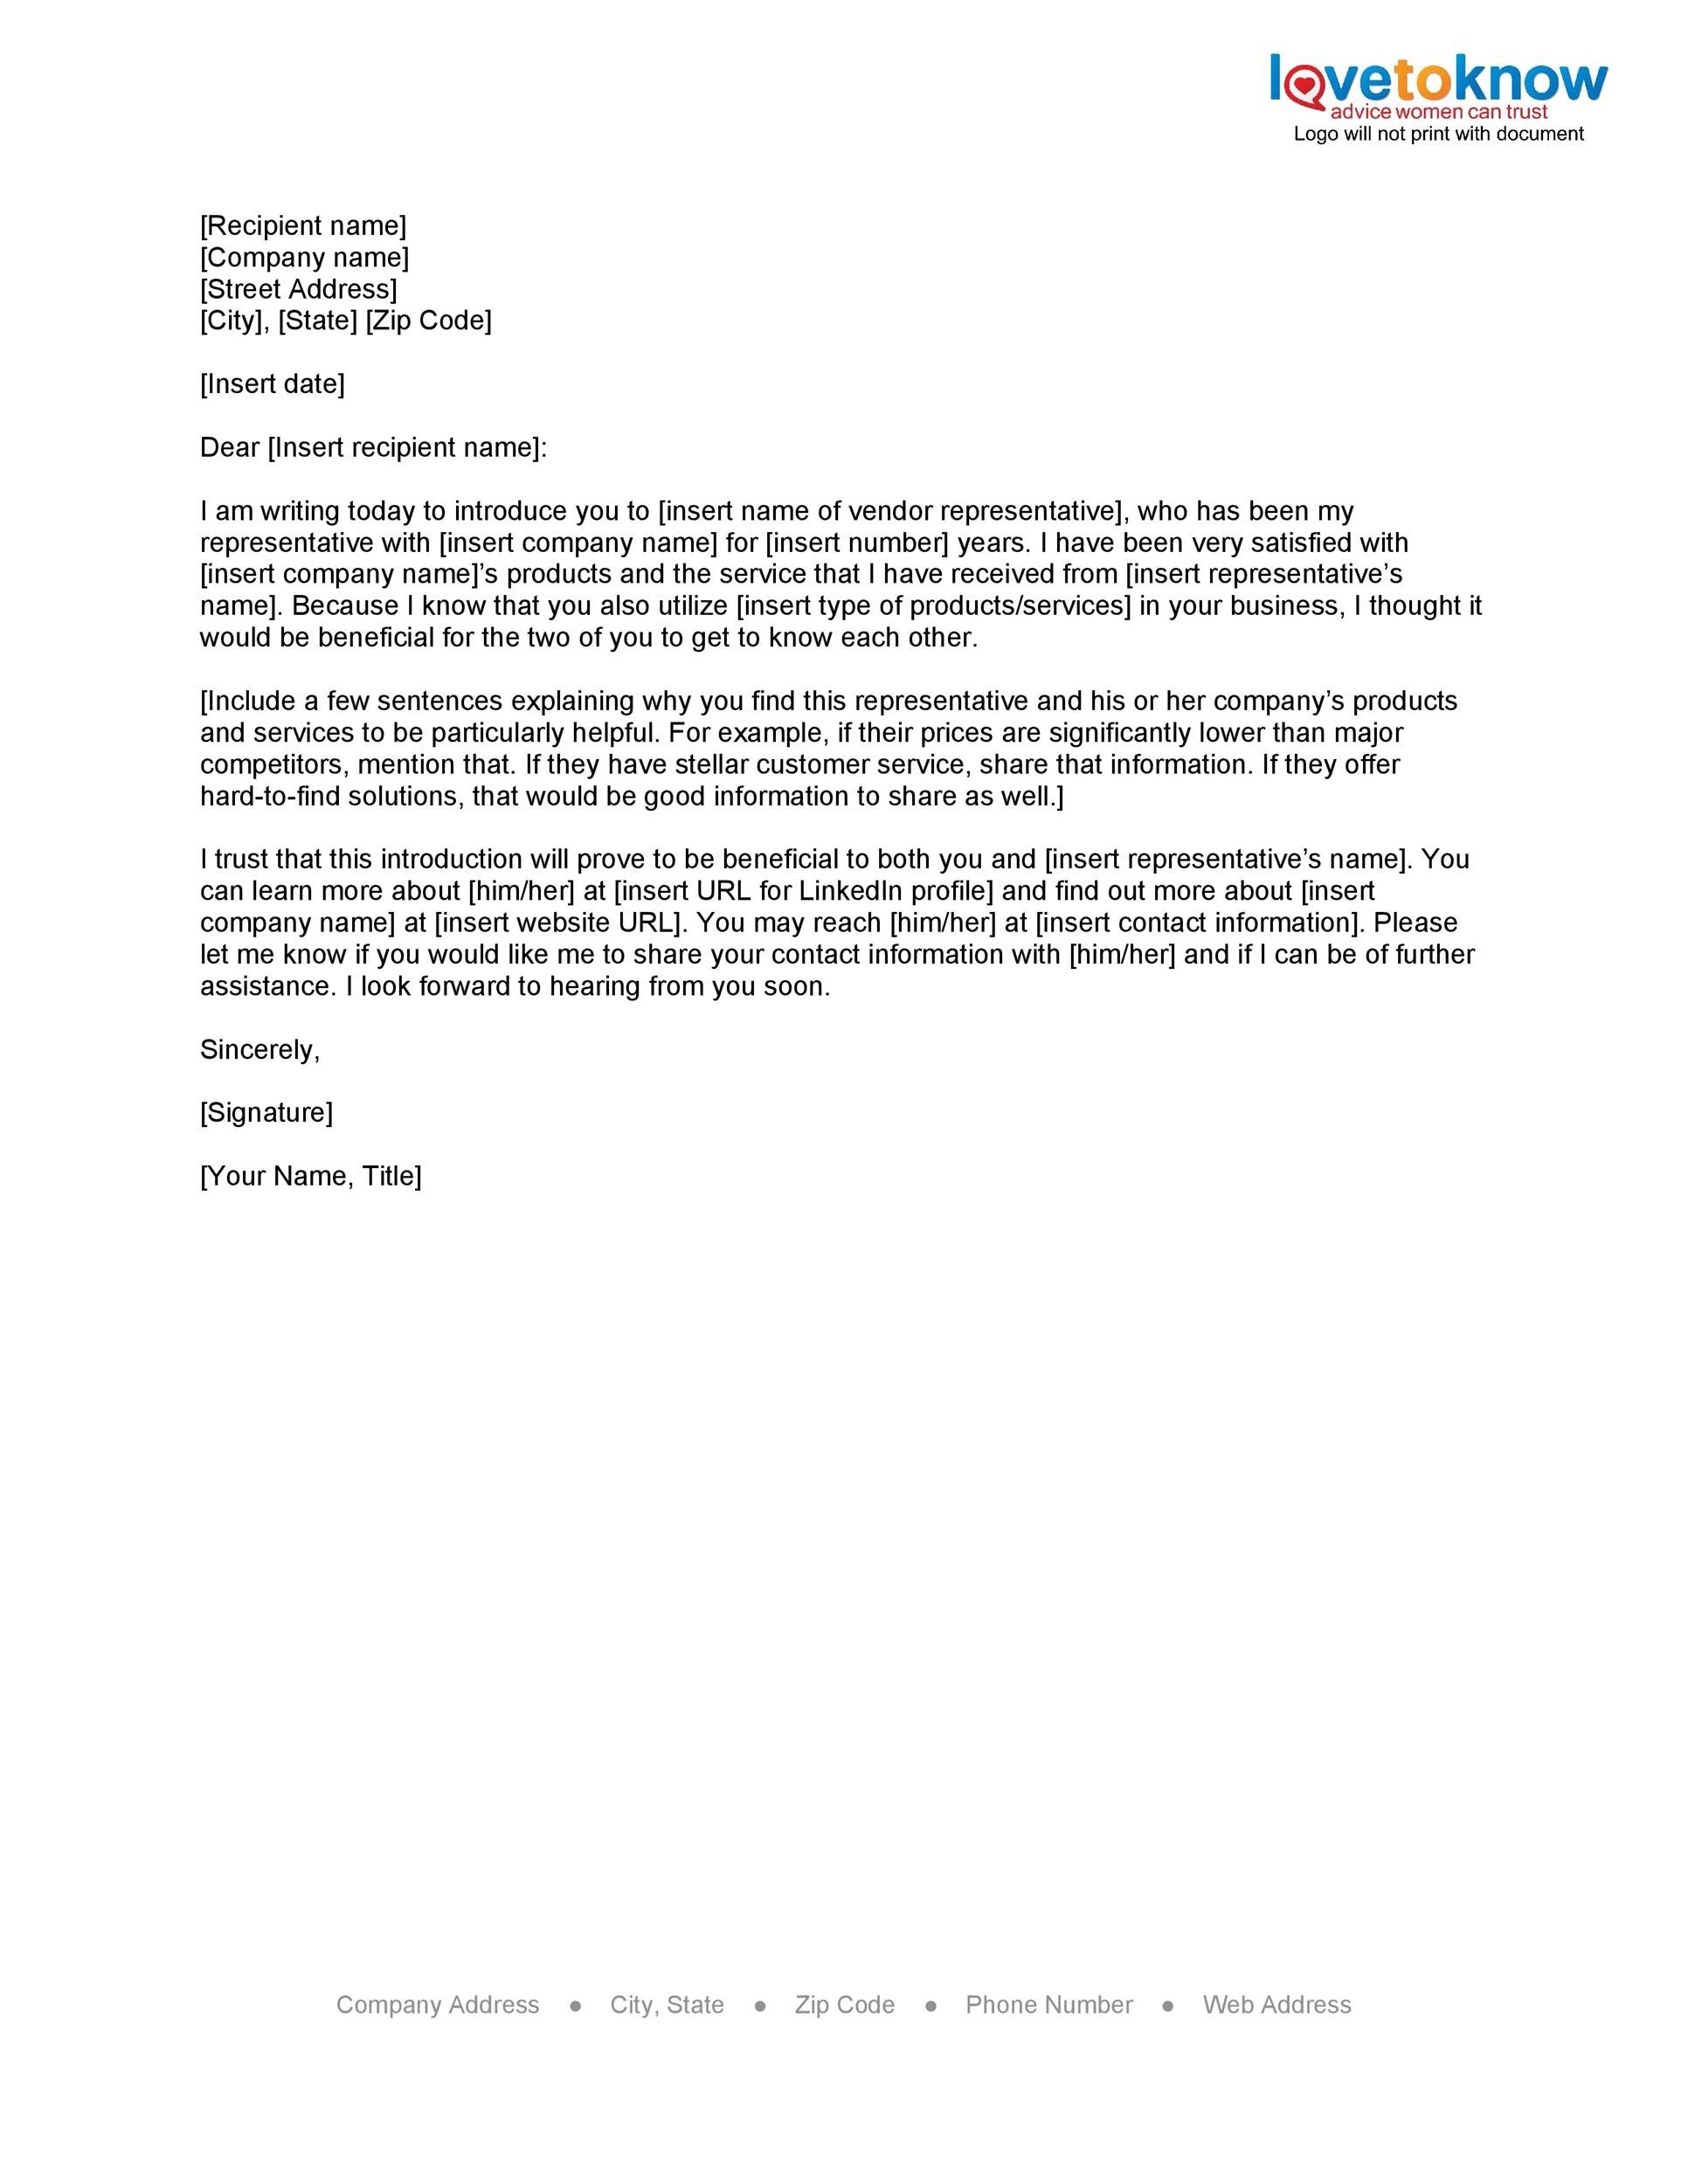 Sample Business Intro Letter from templatelab.com